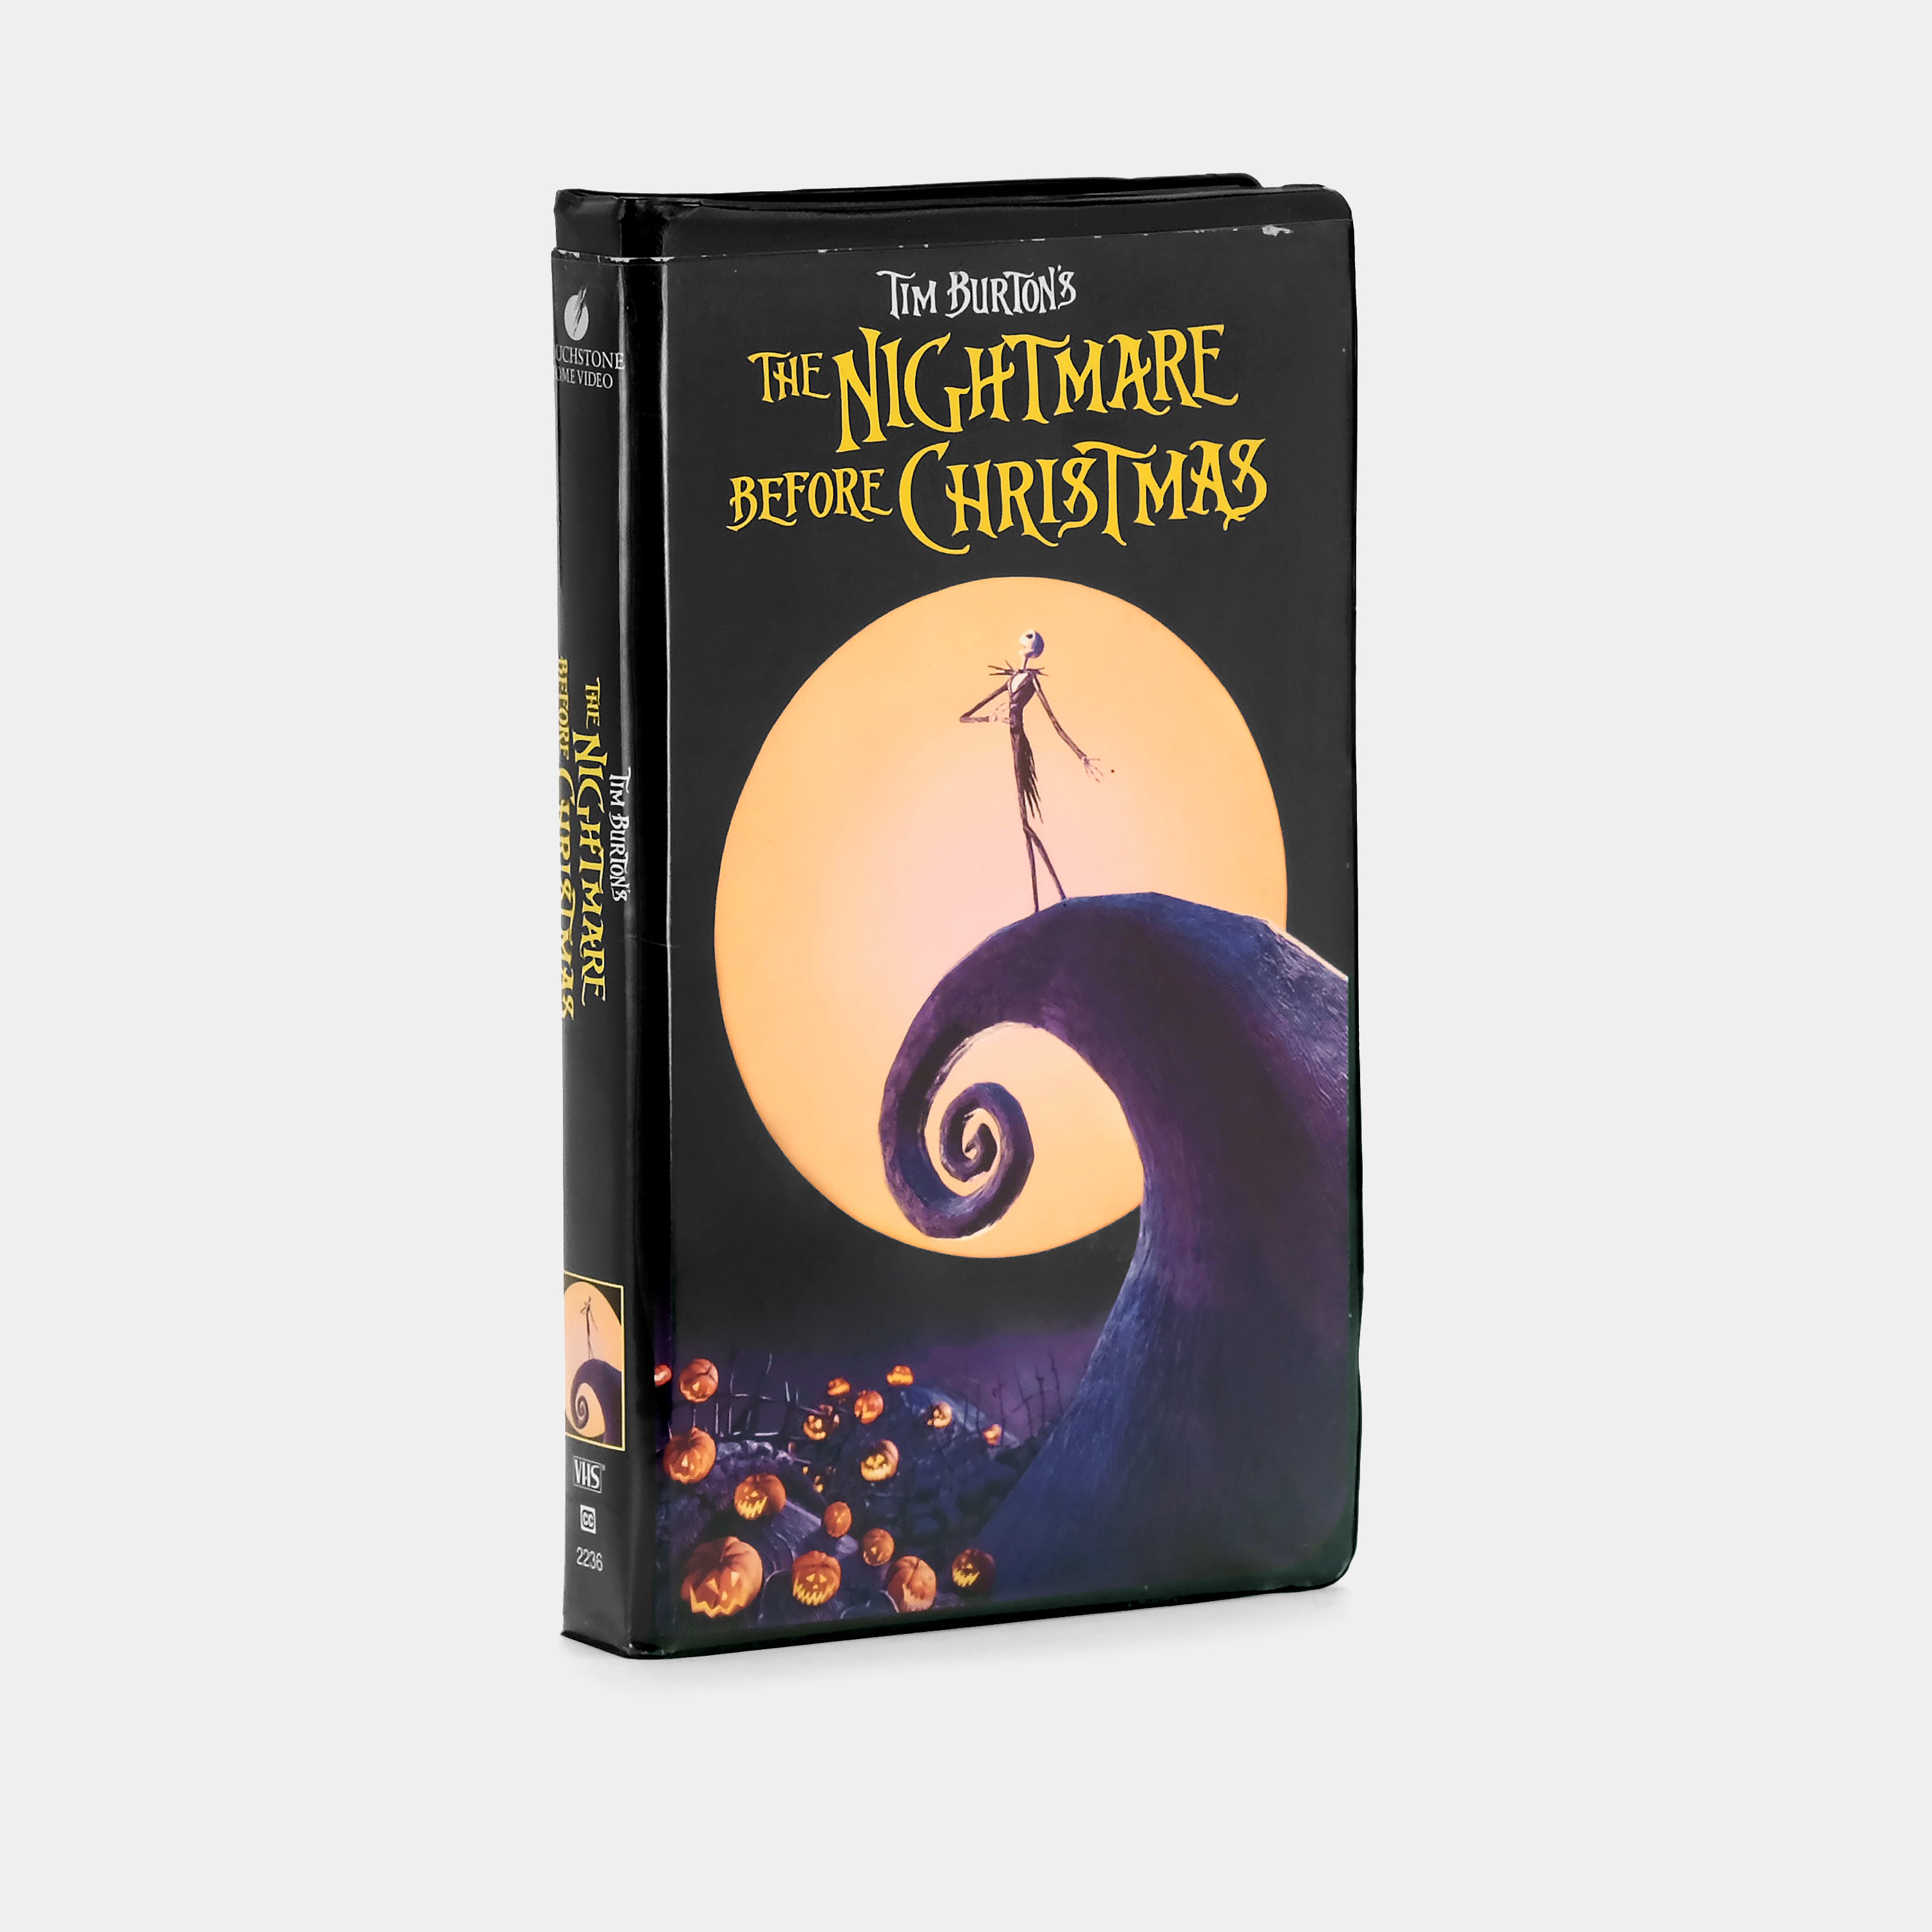 The Nightmare Before Christmas VHS Tape